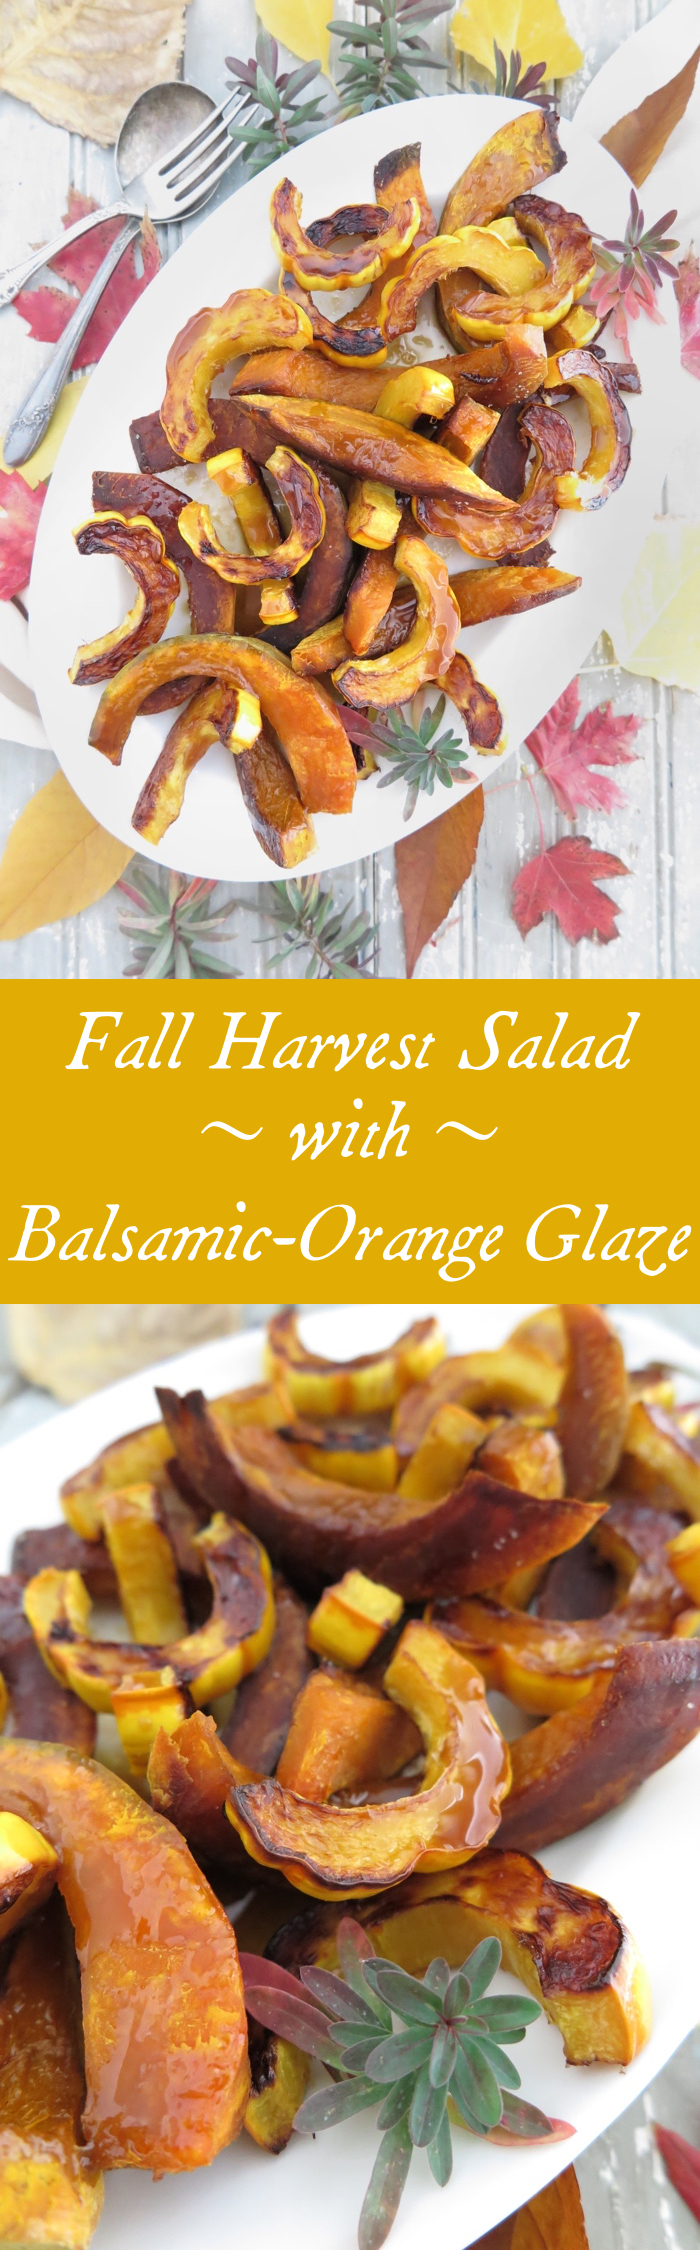 Fall Harvest Salad with Balsamic-Orange Glaze [Paleo - AIP] This side dish is so beautiful and so easy to make! With delicata squash and kabocha squash, this is the perfect complement to your Thanksgiving turkey!